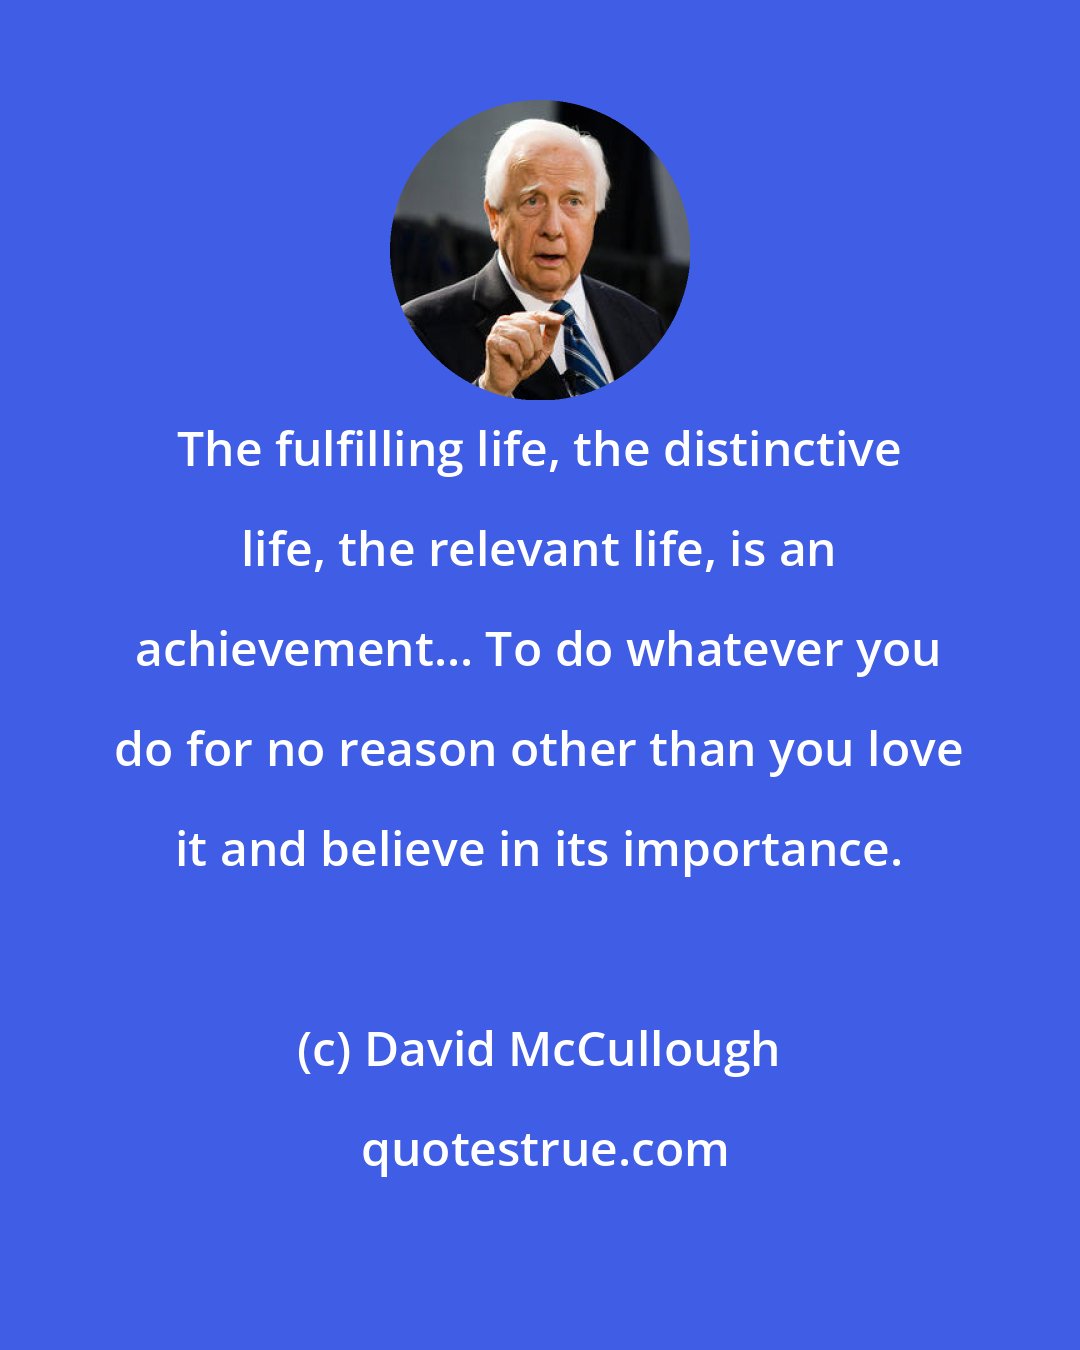 David McCullough: The fulfilling life, the distinctive life, the relevant life, is an achievement... To do whatever you do for no reason other than you love it and believe in its importance.